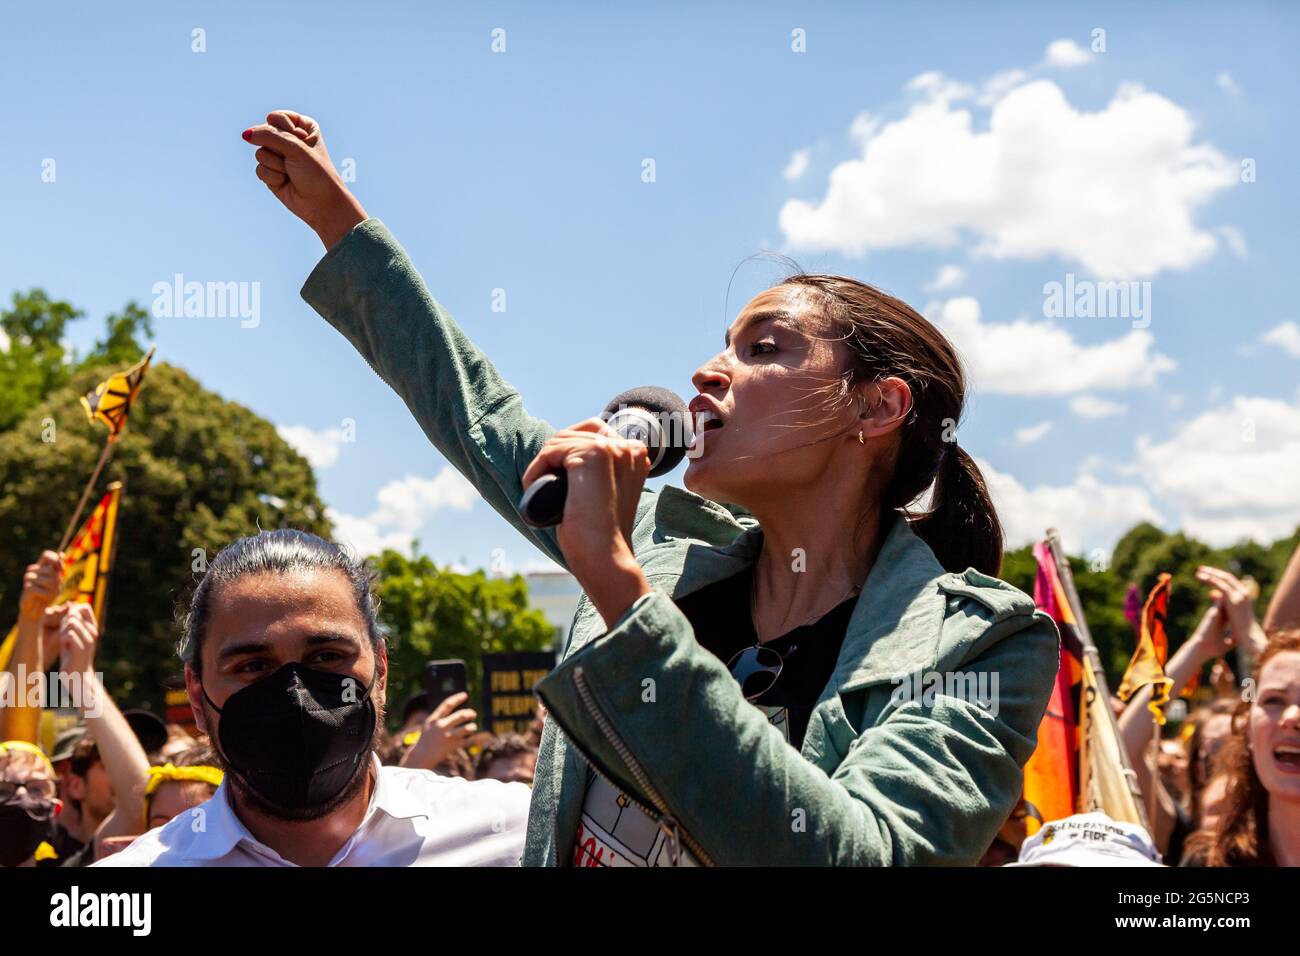 Washington, DC, USA, 28 June, 2021.  Pictured: Congresswoman Alexandria Ocasio-Cortez (D-NY) speaks to hundreds of protesters in Lafayette Square in front of the White House.  Protesters are young adults who are members of the Sunrise Movement.  They have 3 demands of the Biden Administration: no compromises on climate with Congressional Republicans, meeting with Sunrise Movement, and the creation of a Civilian Conservation Corps.  Credit: Allison Bailey / Alamy Live News Stock Photo